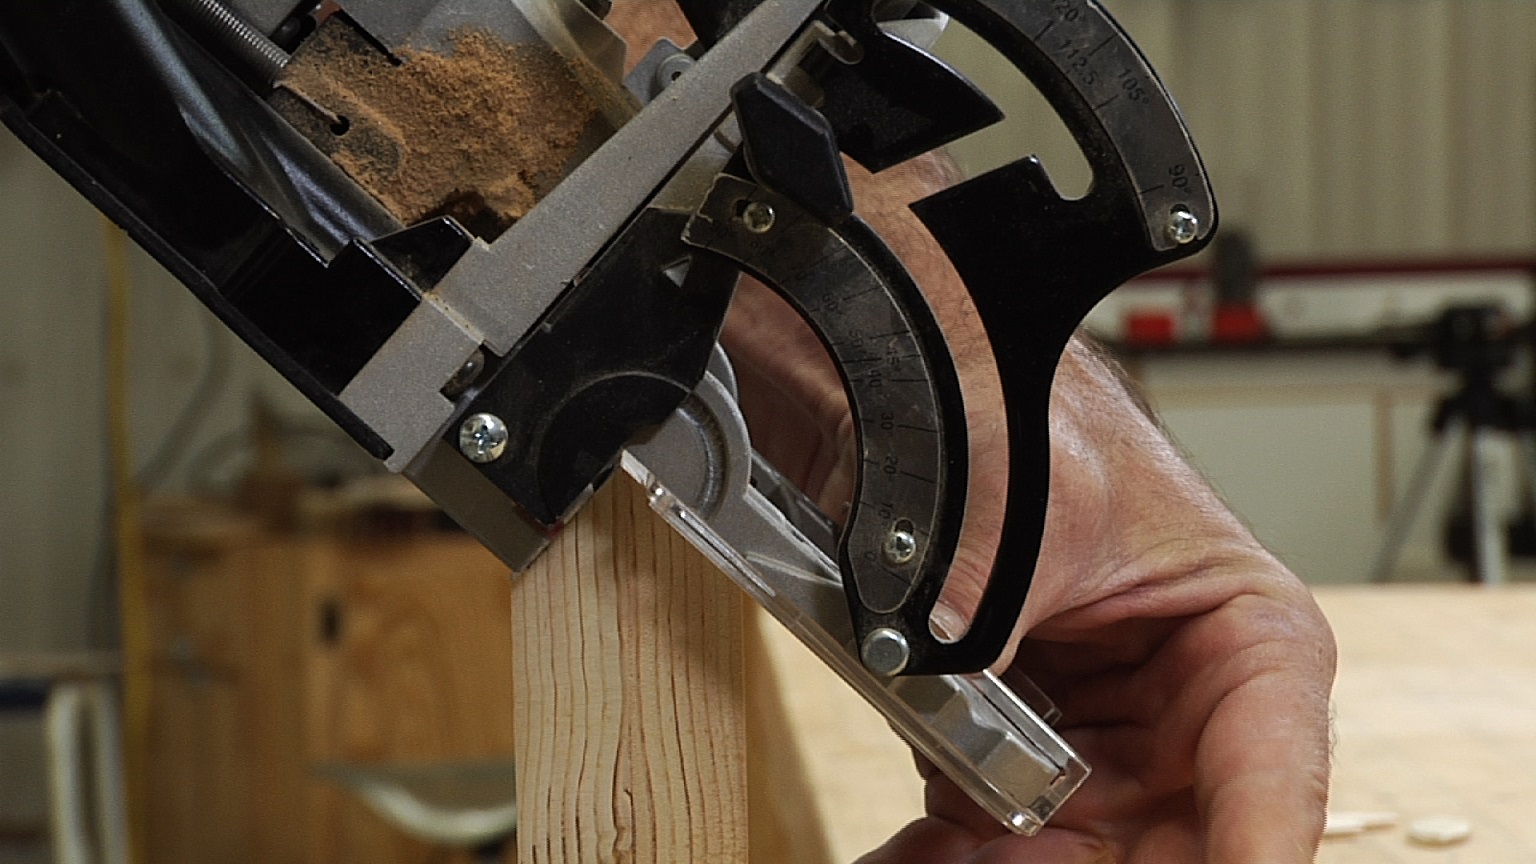 Using a Biscuit Joiner: Reinforcing a Miter product featured image thumbnail.